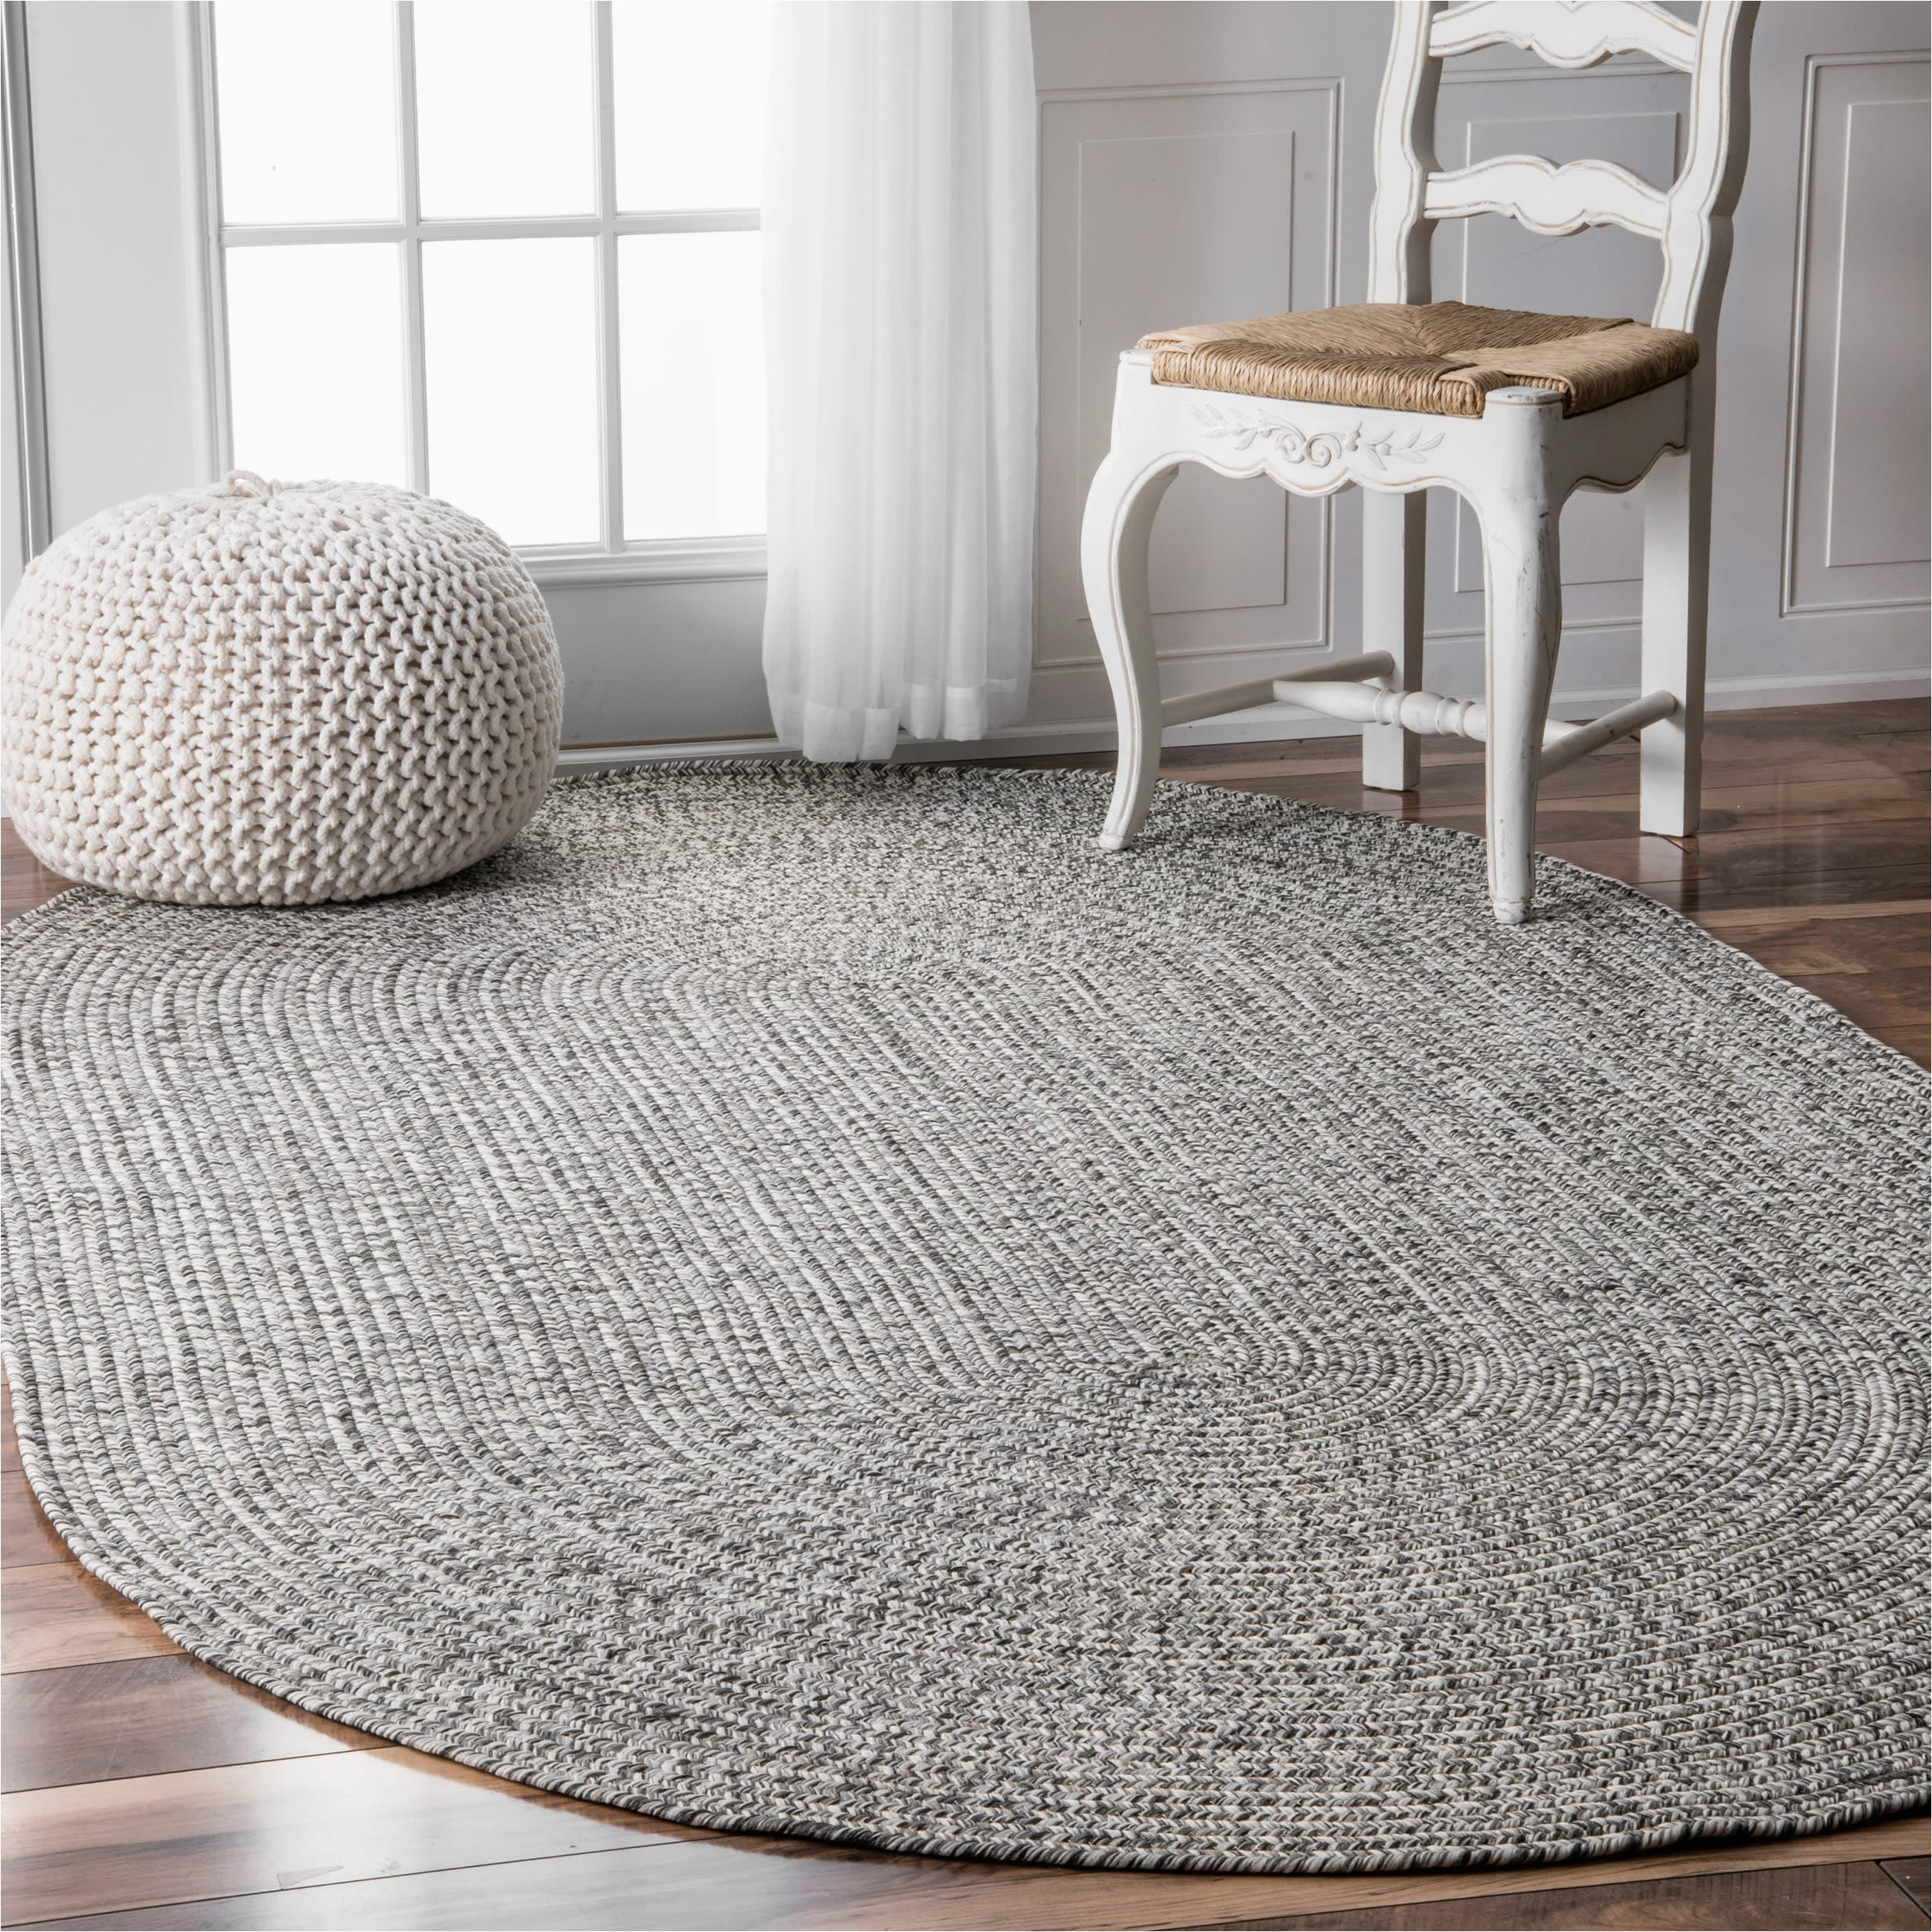 Oval area Rugs 9 X 12 Nuloom 9 X 12 Braided Salt and Pepper Oval Indoor/outdoor solid …